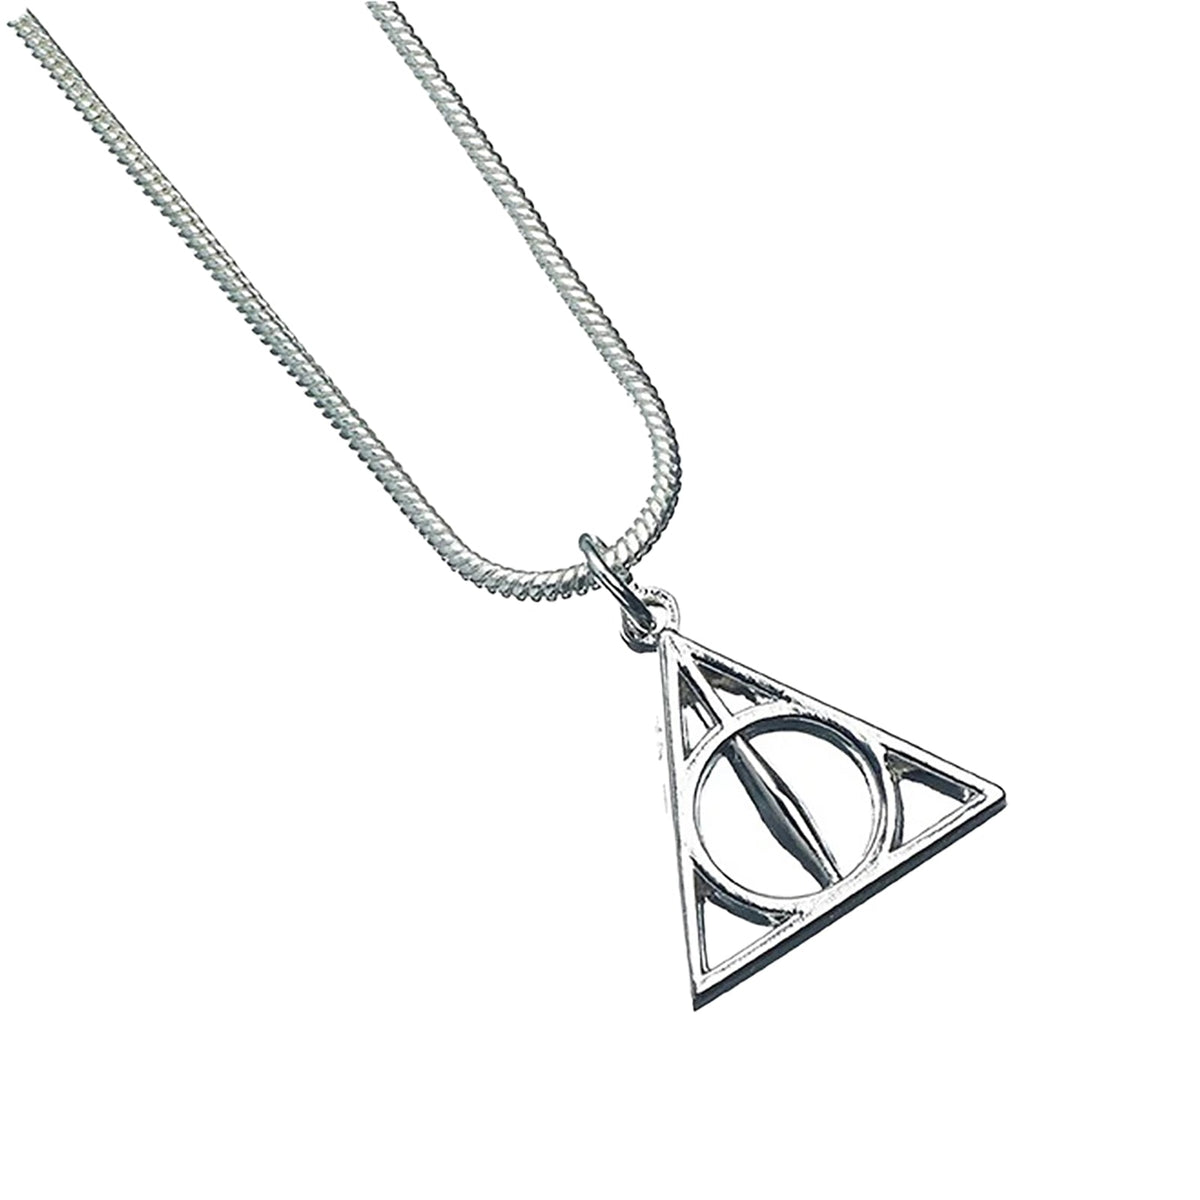 Alex and Ani Harry Potter Deathly Hallows Necklace - Rafaelian Silver  Finish | REEDS Jewelers